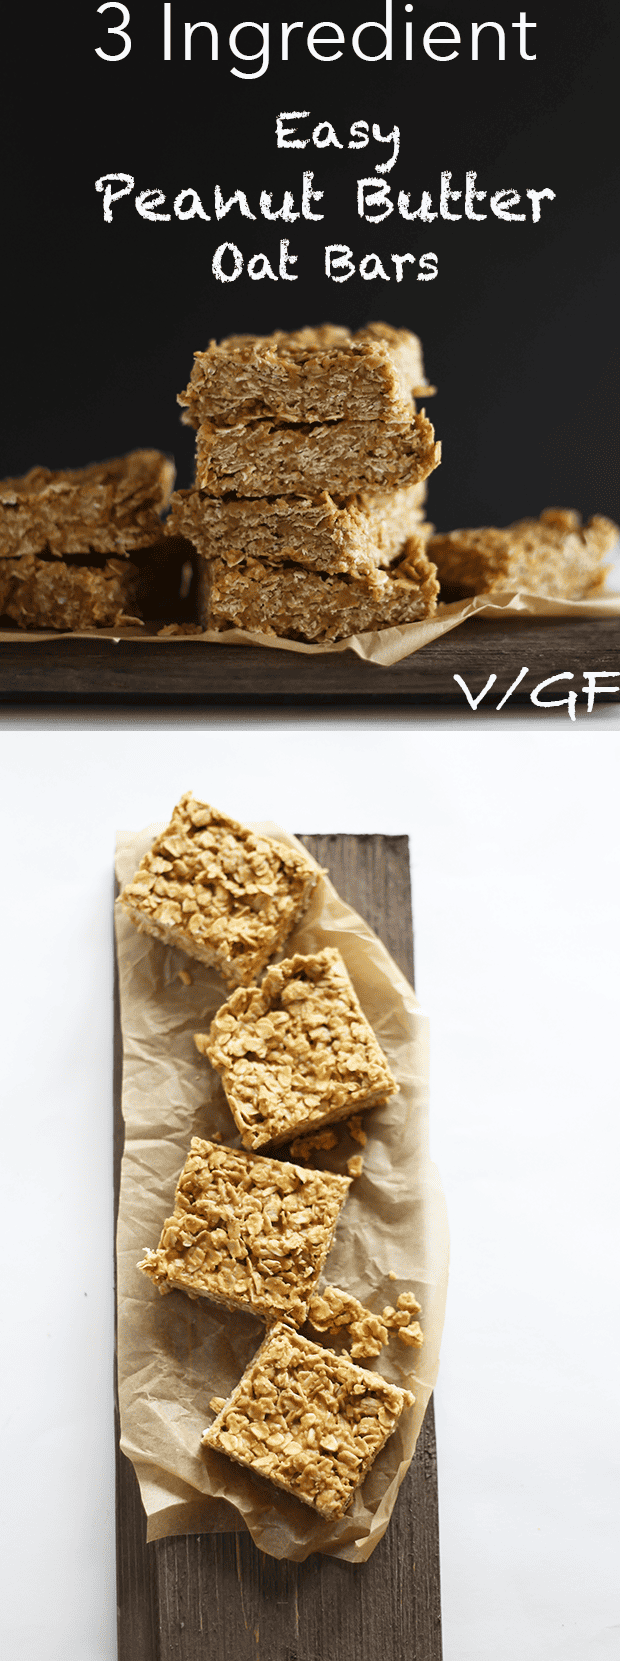 These 3 Ingredient Easy Peanut Butter Oat Bars are quick and easy to make, NO BAKING, healthy, naturally sweetened and vegan + GF! | TwoRaspberries.com